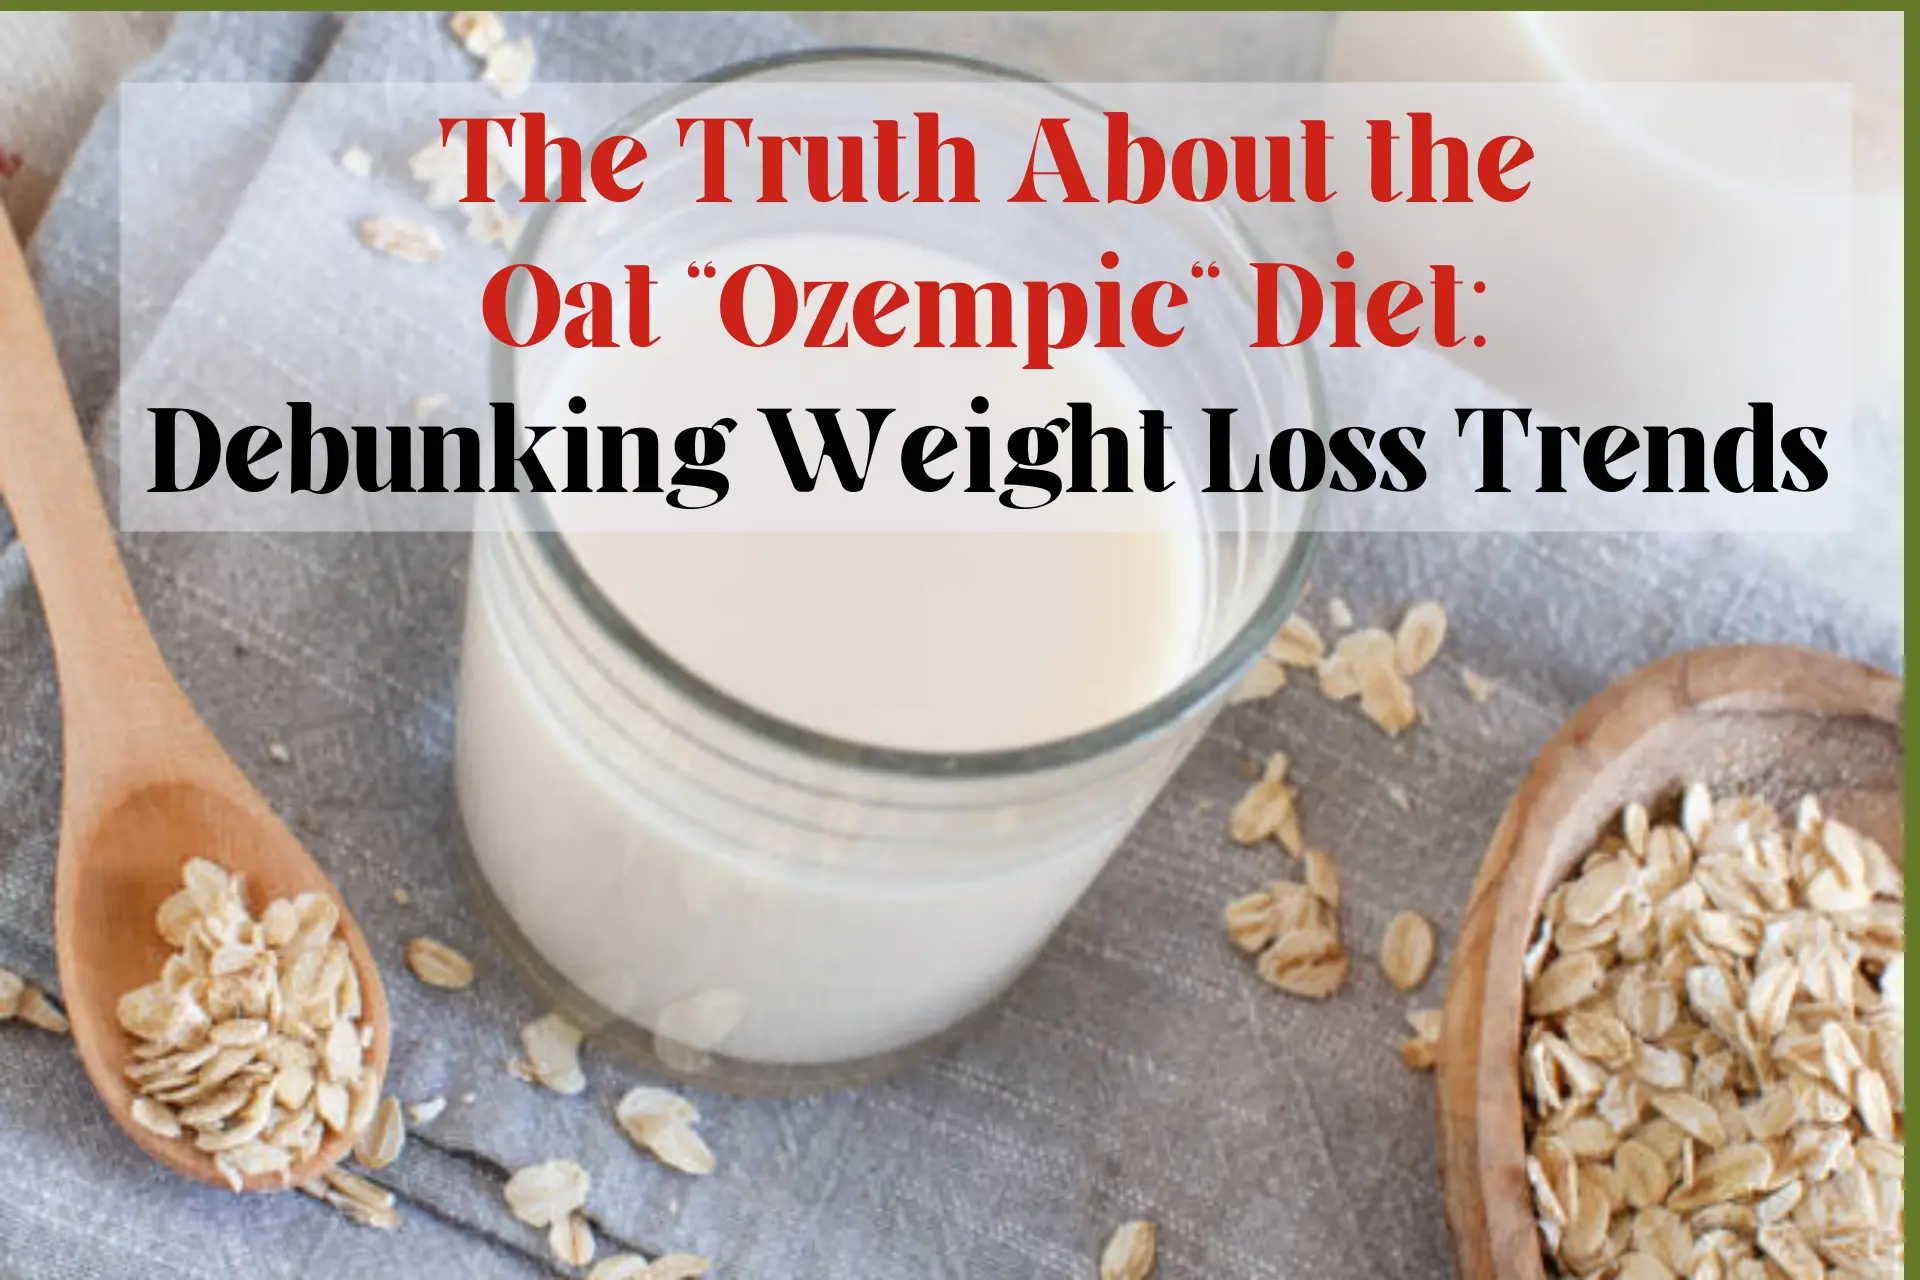 You are currently viewing The Truth About the Oat Ozempic Diet: Debunking Weight Loss Trends